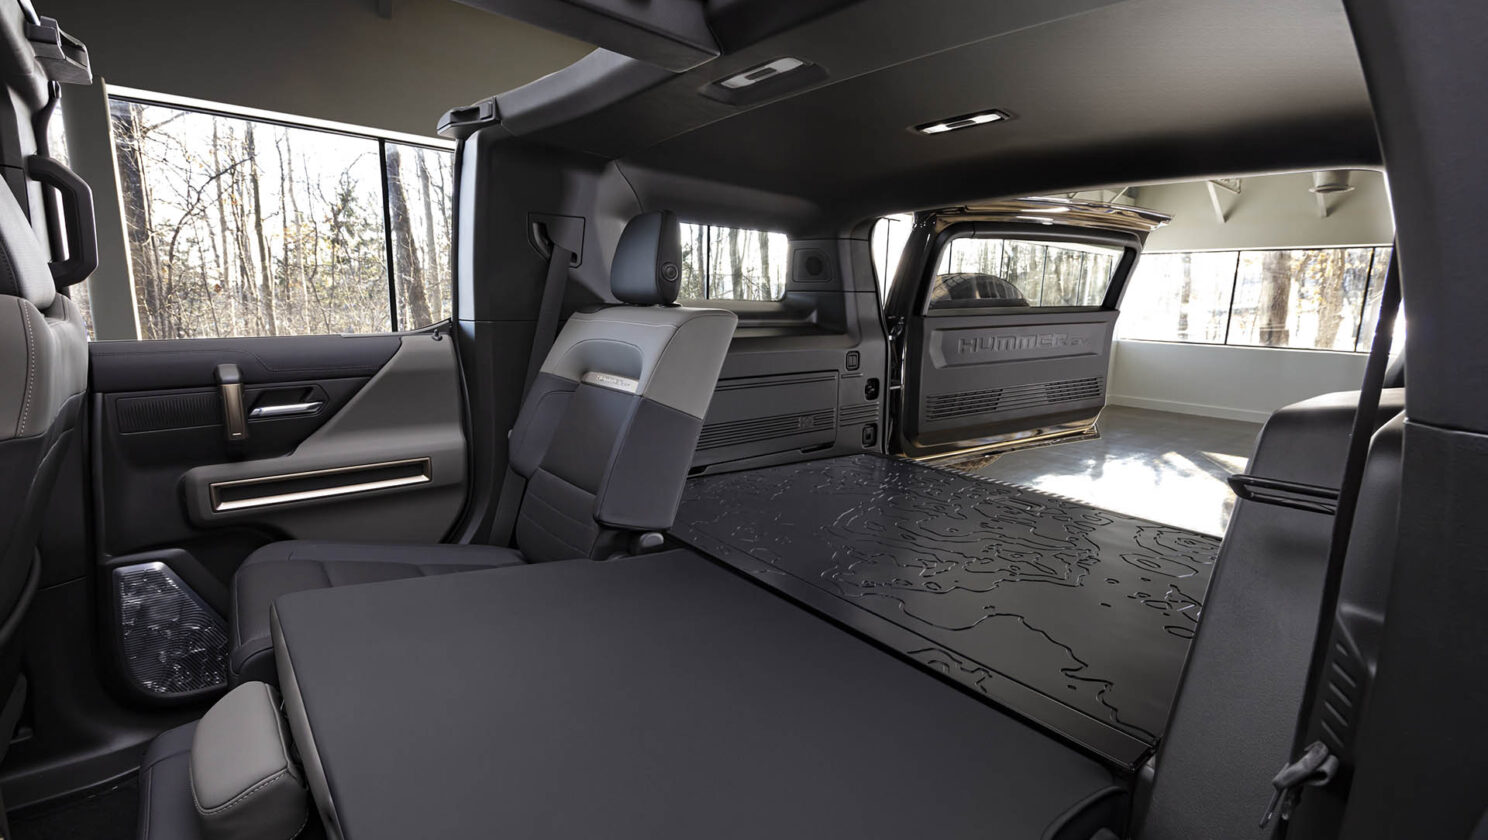 The GMC HUMMER EV SUV debuts in the low-contrast Lunar Shadow in